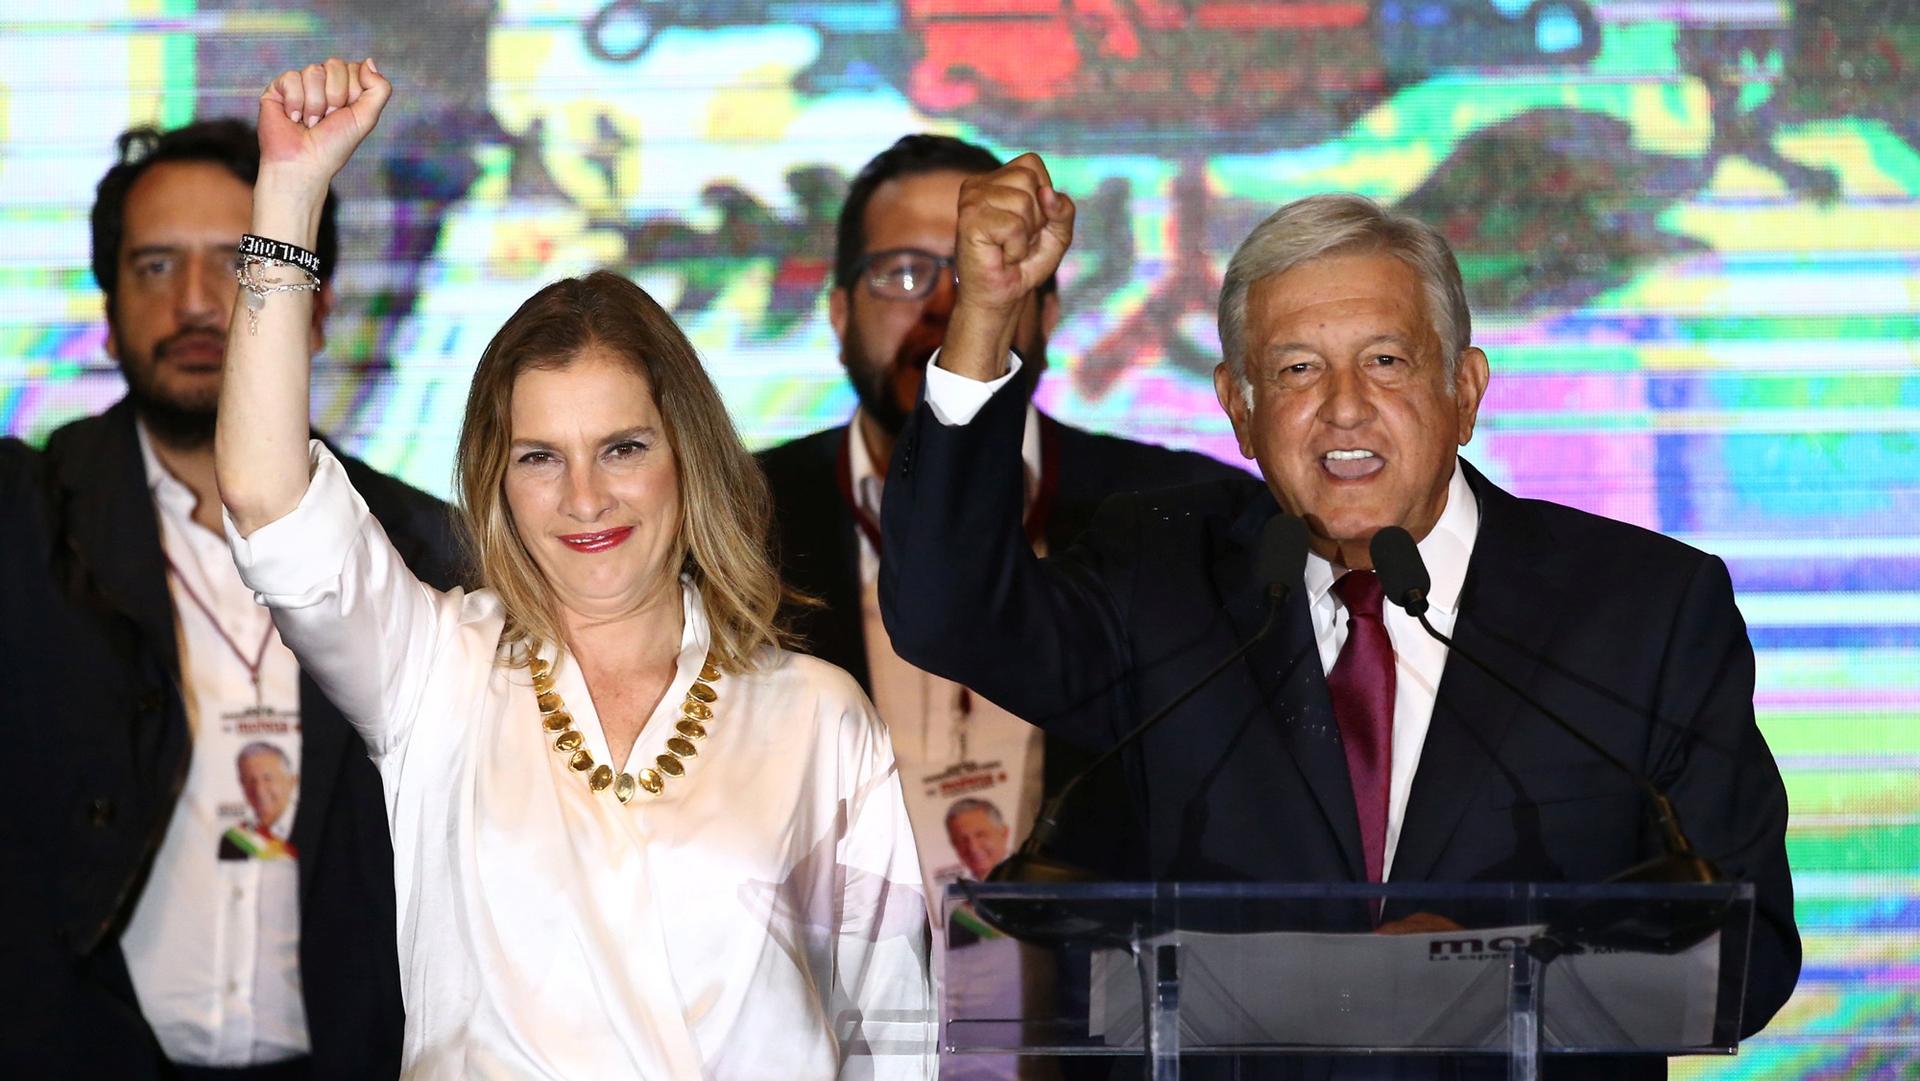 Andrés Manuel López Obrador and his wife Beatriz Gutierrez Muller raise their clenched hands on a stage in Mexico City.